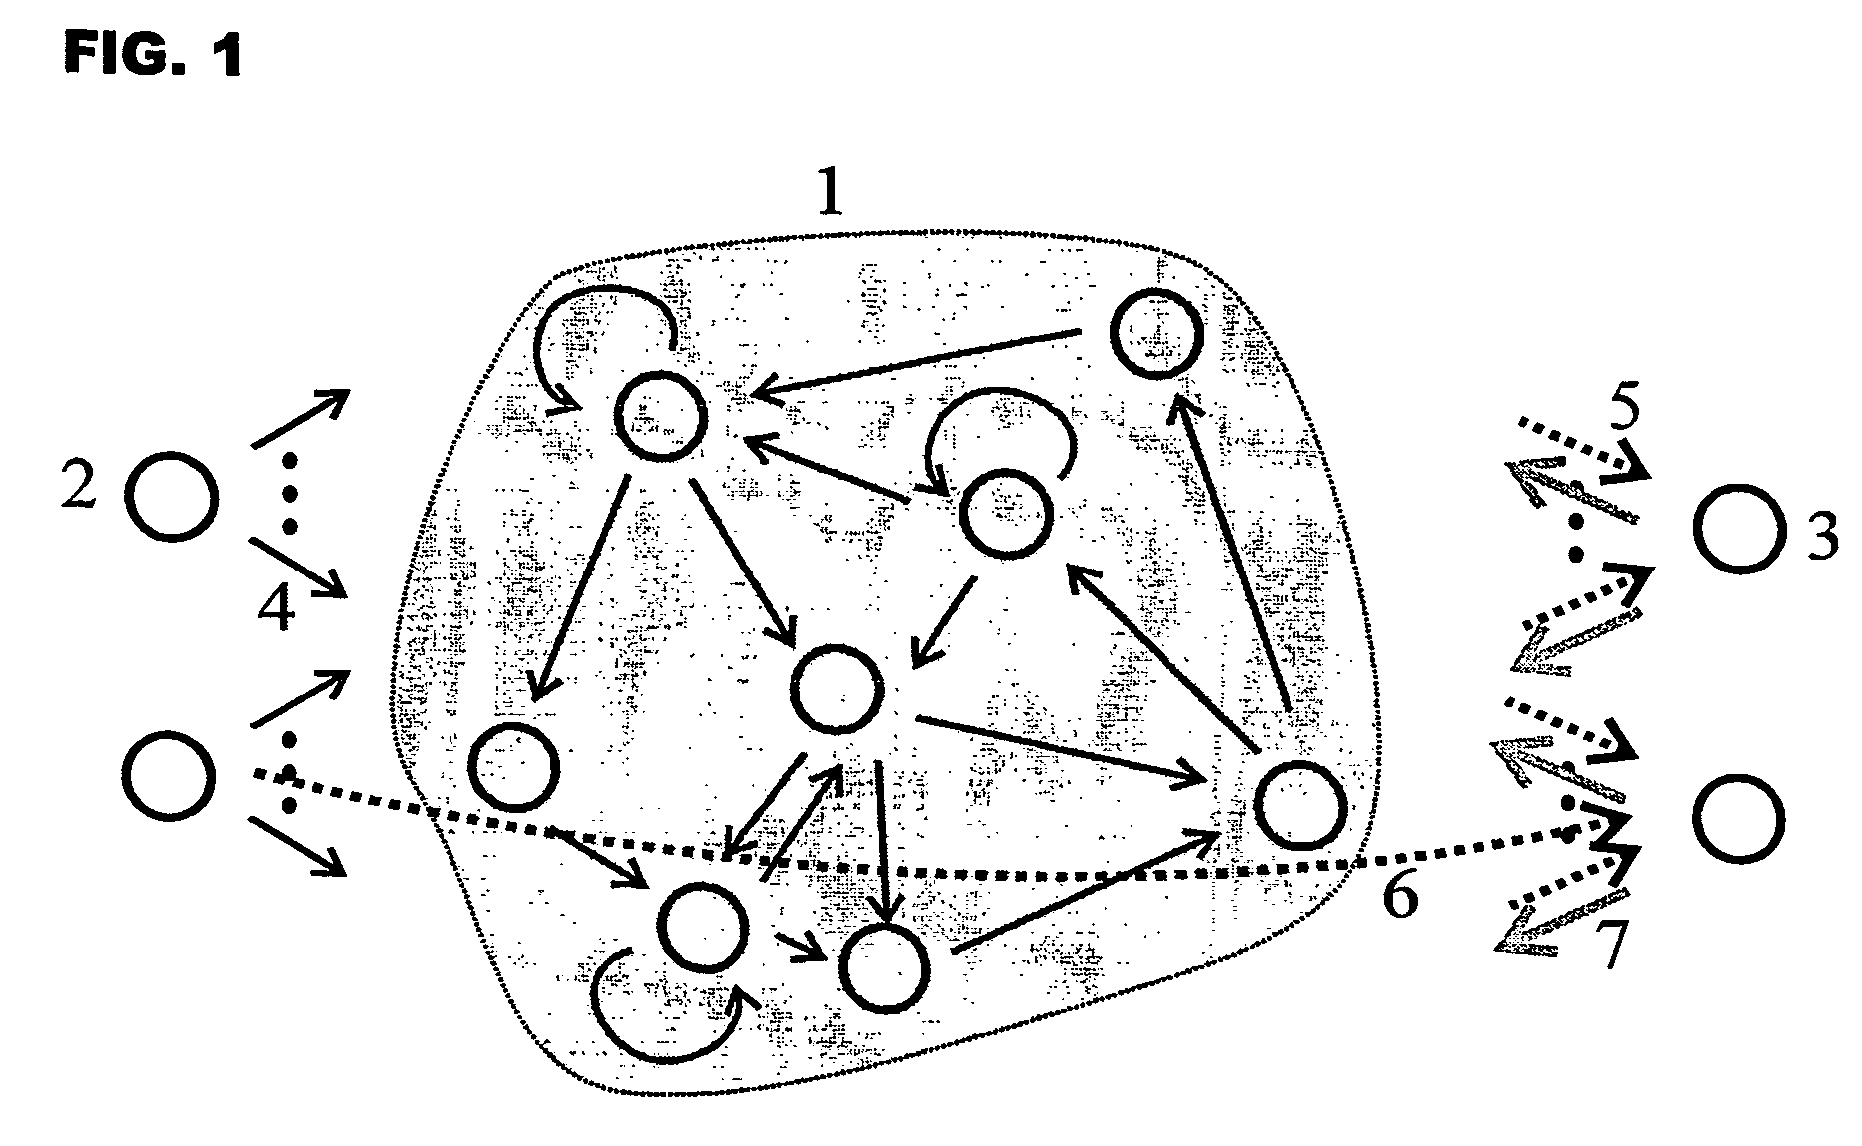 Method for supervised teaching of a recurrent artificial neural network